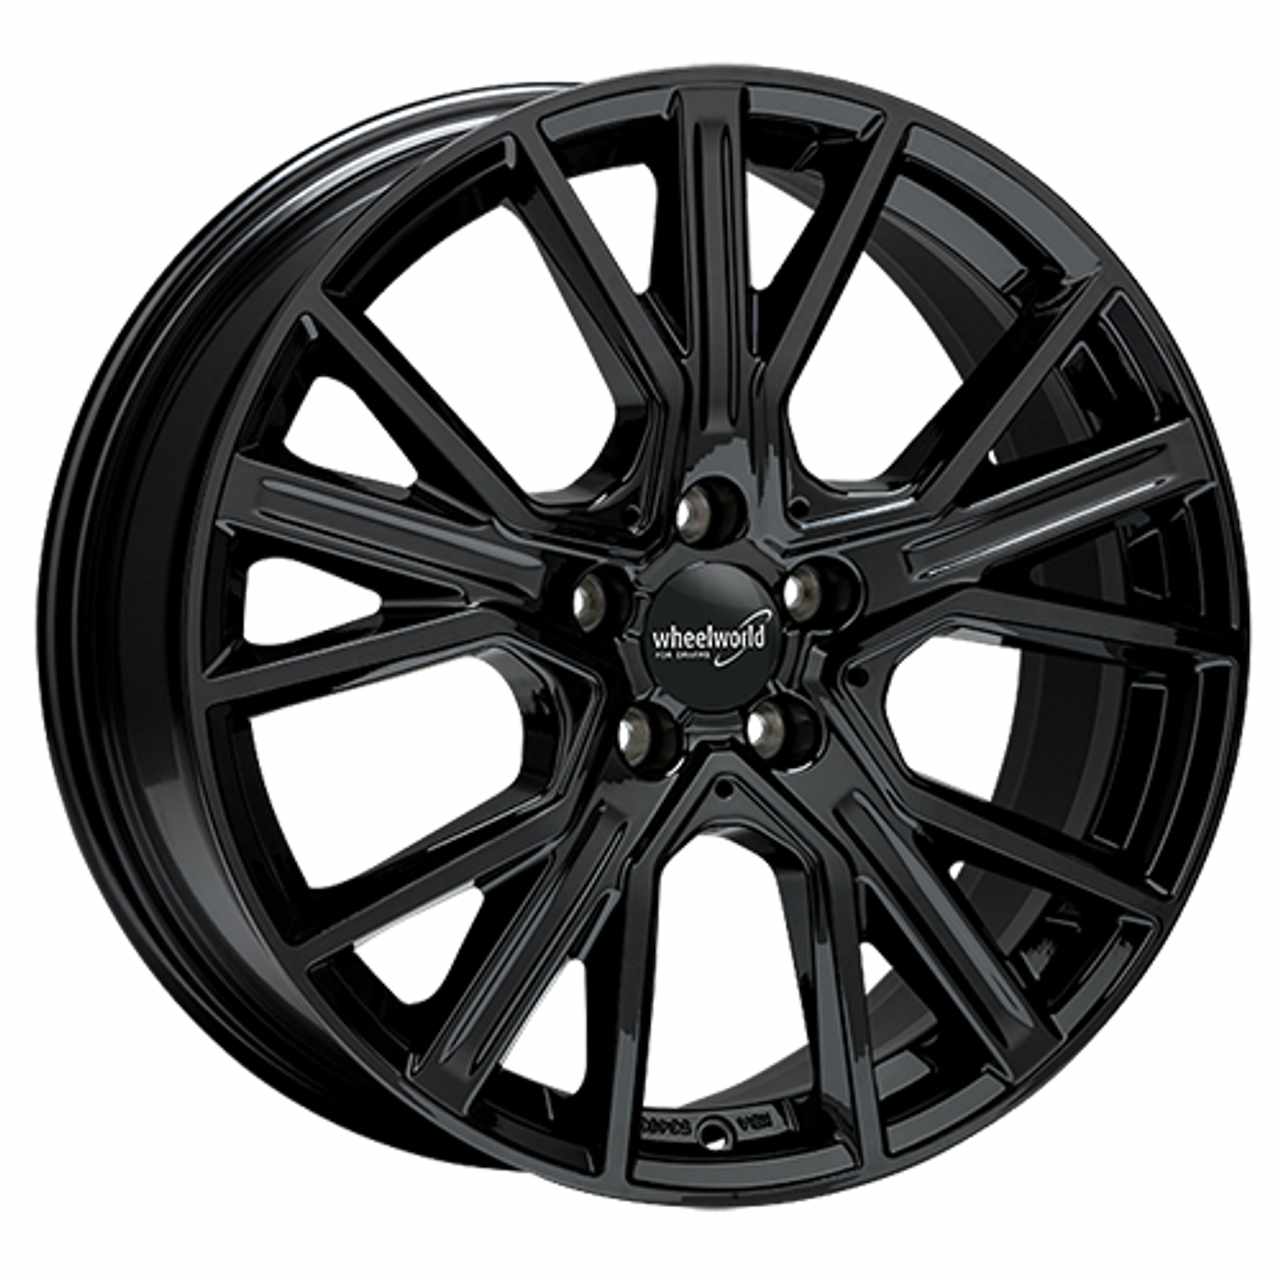 WHEELWORLD-2DRV WH34 black glossy painted 7.5Jx17 5x112 ET50